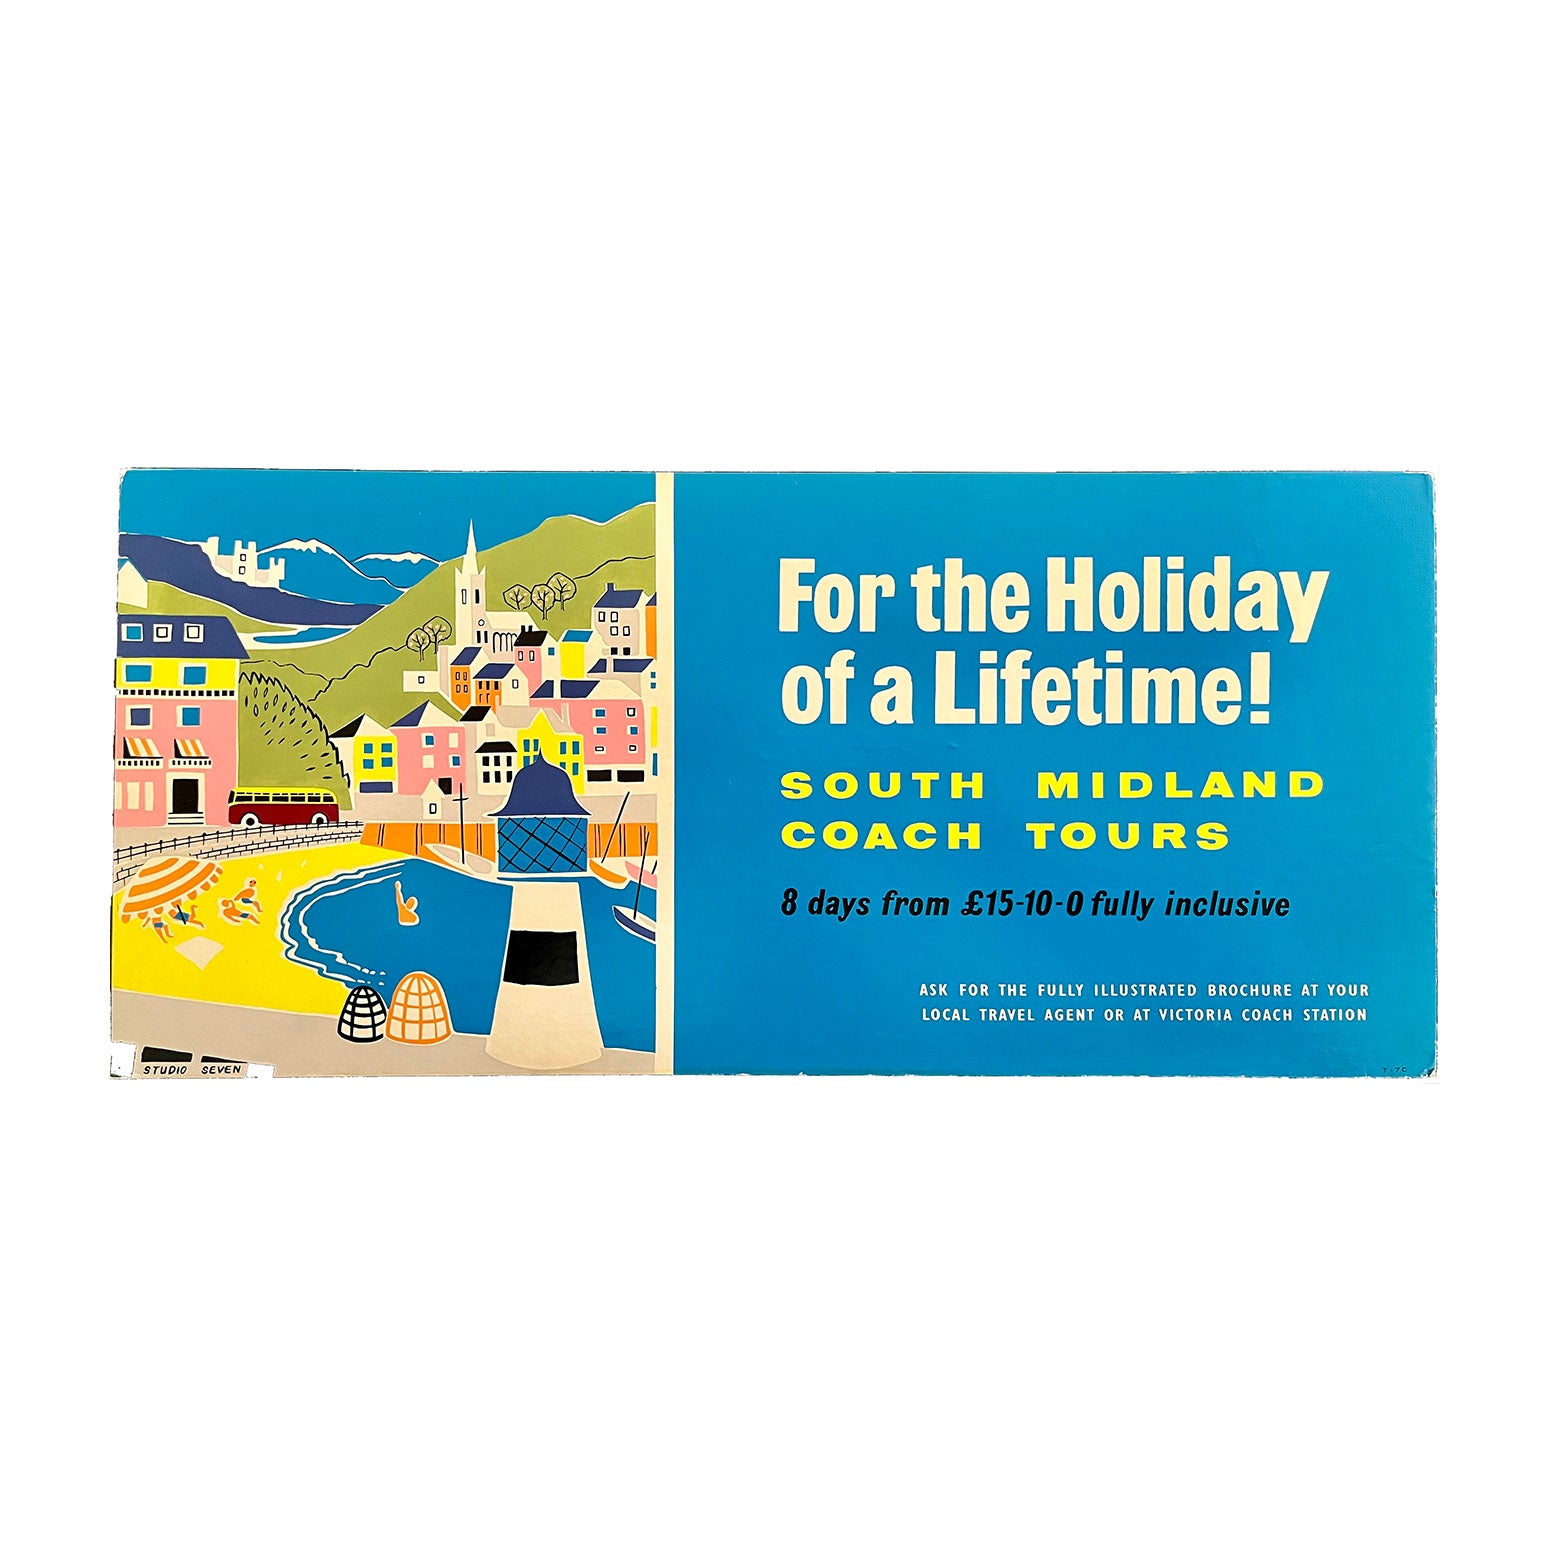 An original card mounted coach advert, For the Holiday of a Lifetime! South Midland Coach Tours, designed by Studio Seven, c. 1960. Incorporates just about everything you might hope/expect from a British holiday, including beach, historic town, castle and mountains